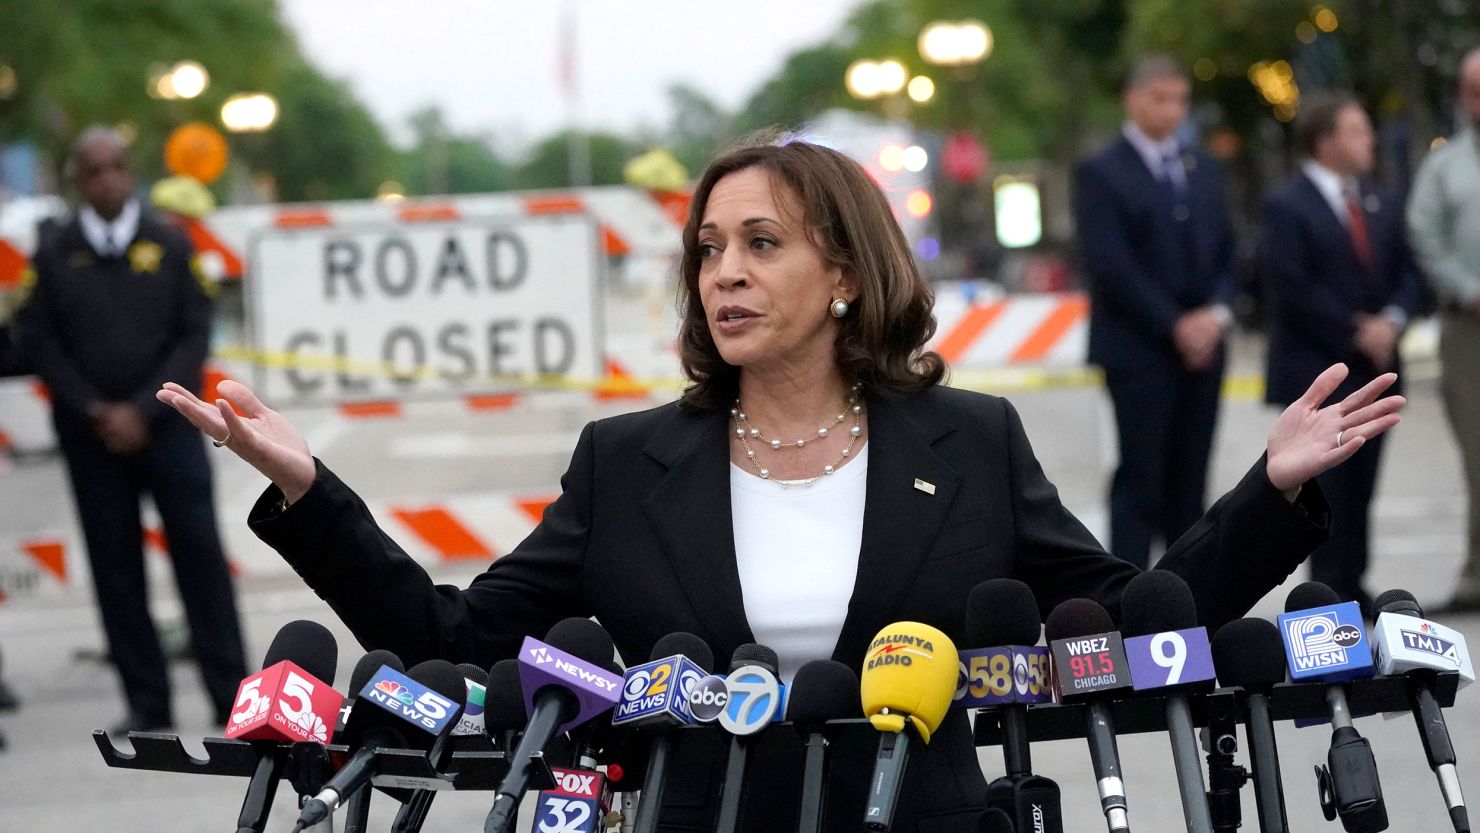 Vice president Kamala Harris speaks to those gathered near the site of Monday's mass shooting during the Highland Park July 4th parade, July 5, 2022, in Highland Park, Ill. 